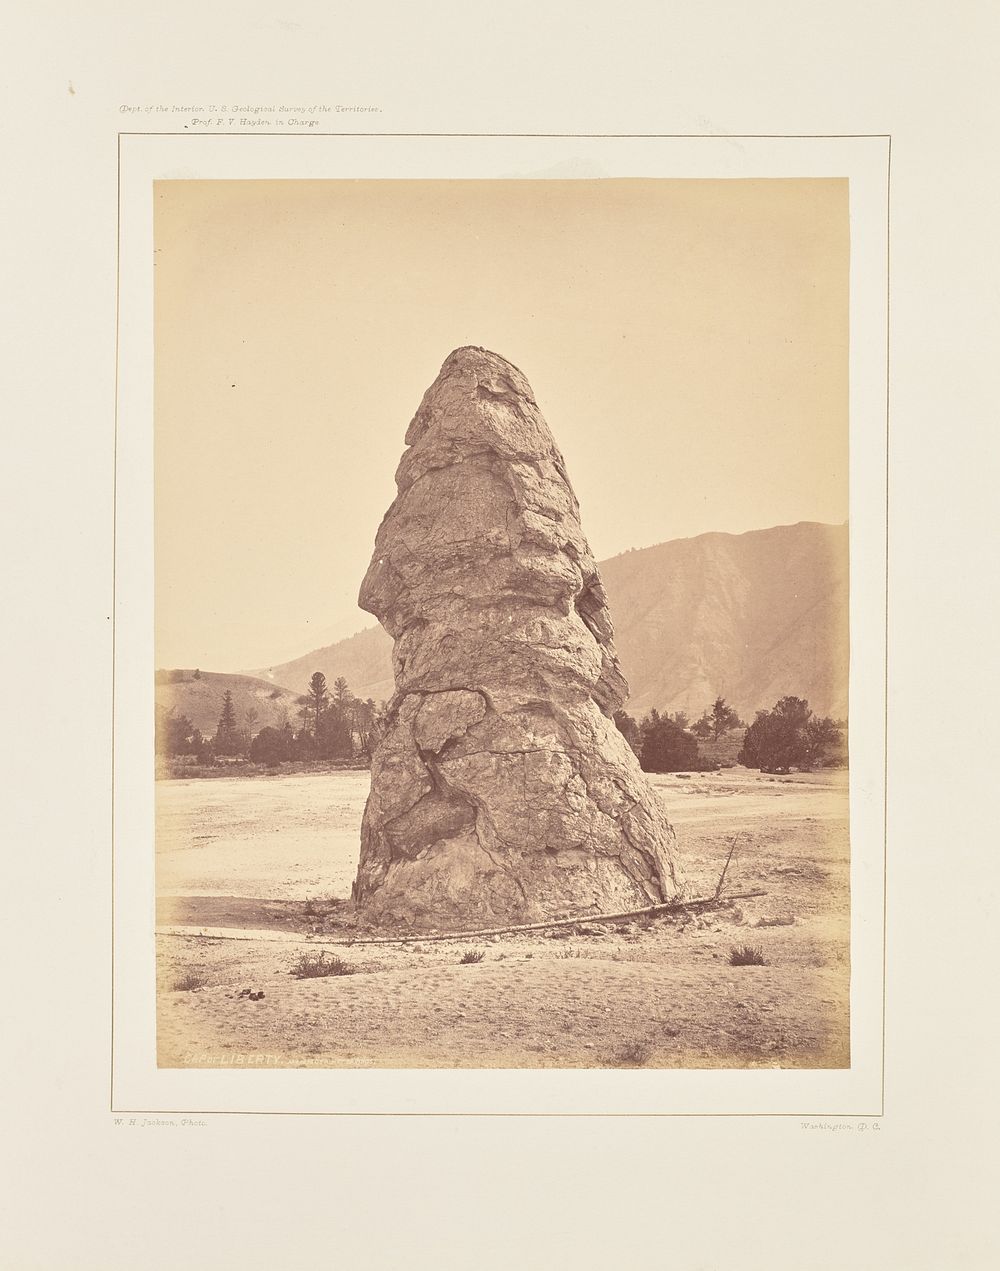 Cap of Liberty, Mammoth Hot Springs by William Henry Jackson